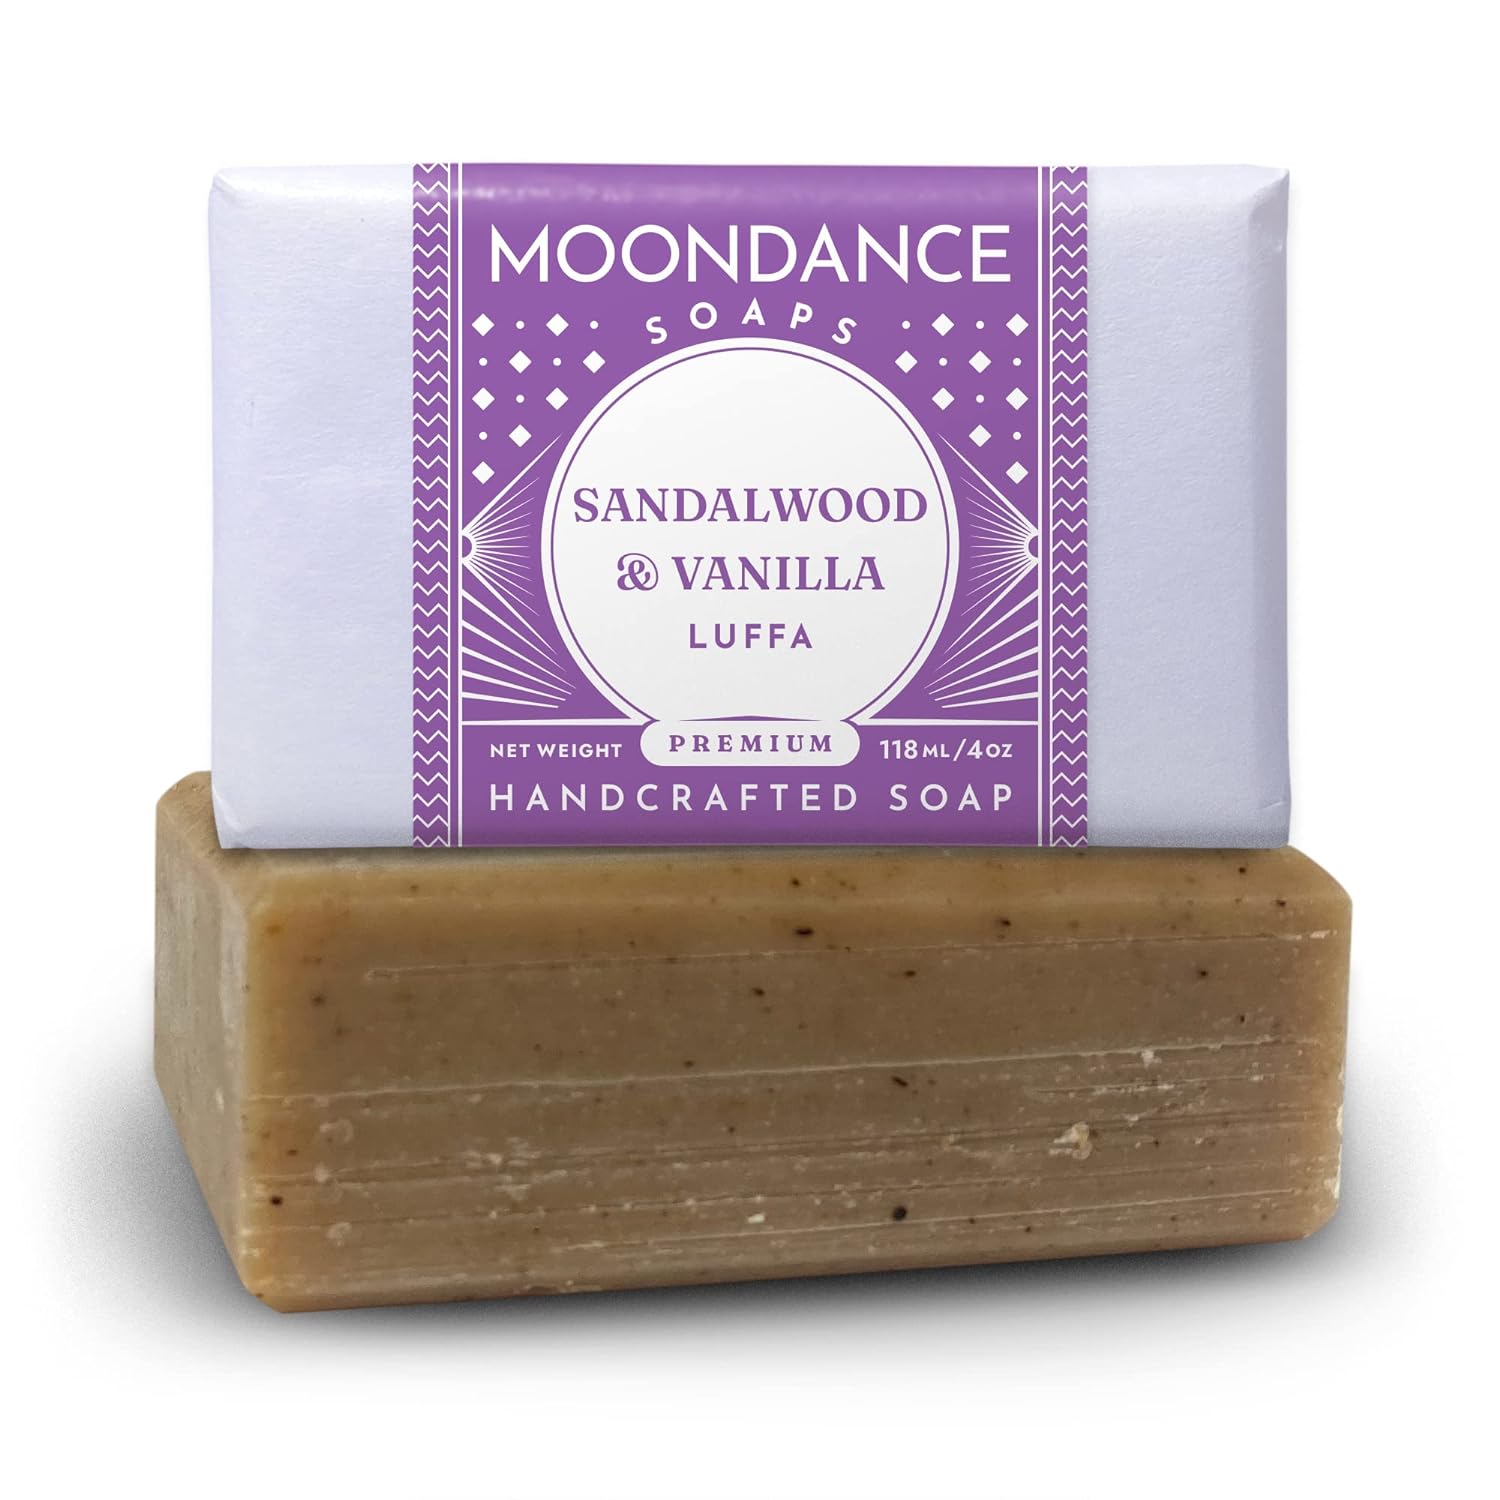 Sandalwood Vanilla Soap - Handmade Soap for Softer Skin with Cocoa Butter, Shea Butter, Sweet Almond, Fragrance and Essential Oils by MoonDance Soaps (One Bar, 4 )